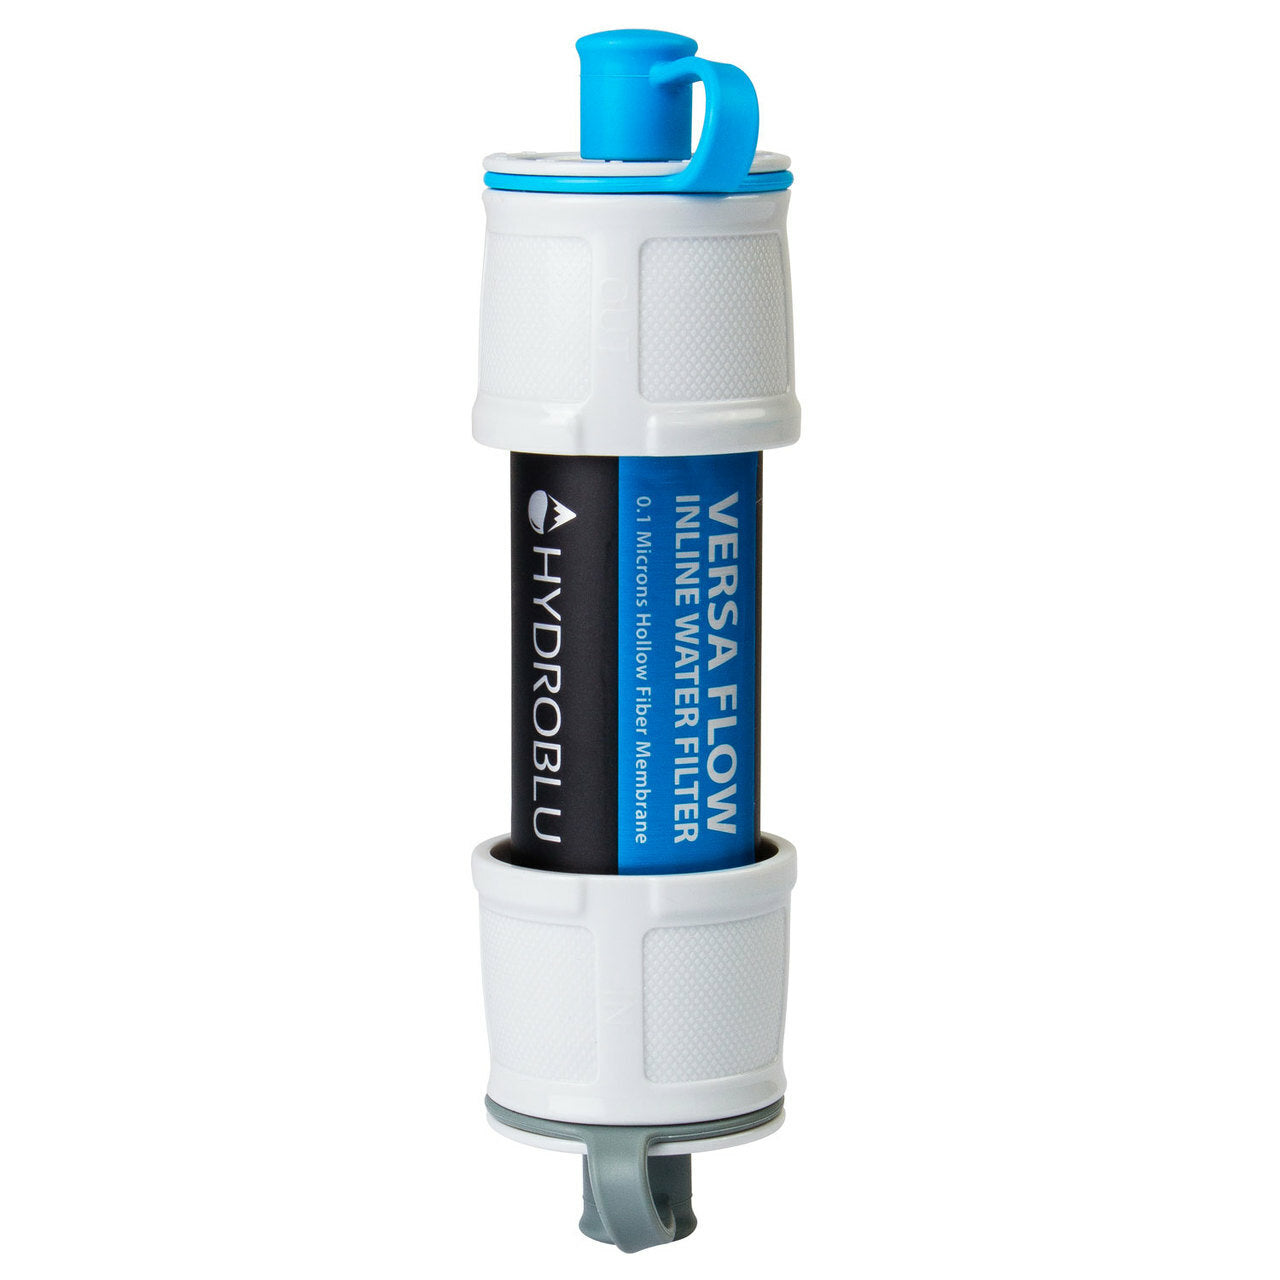 Small light weight water filter with .1 micron rating for inline use on a hose